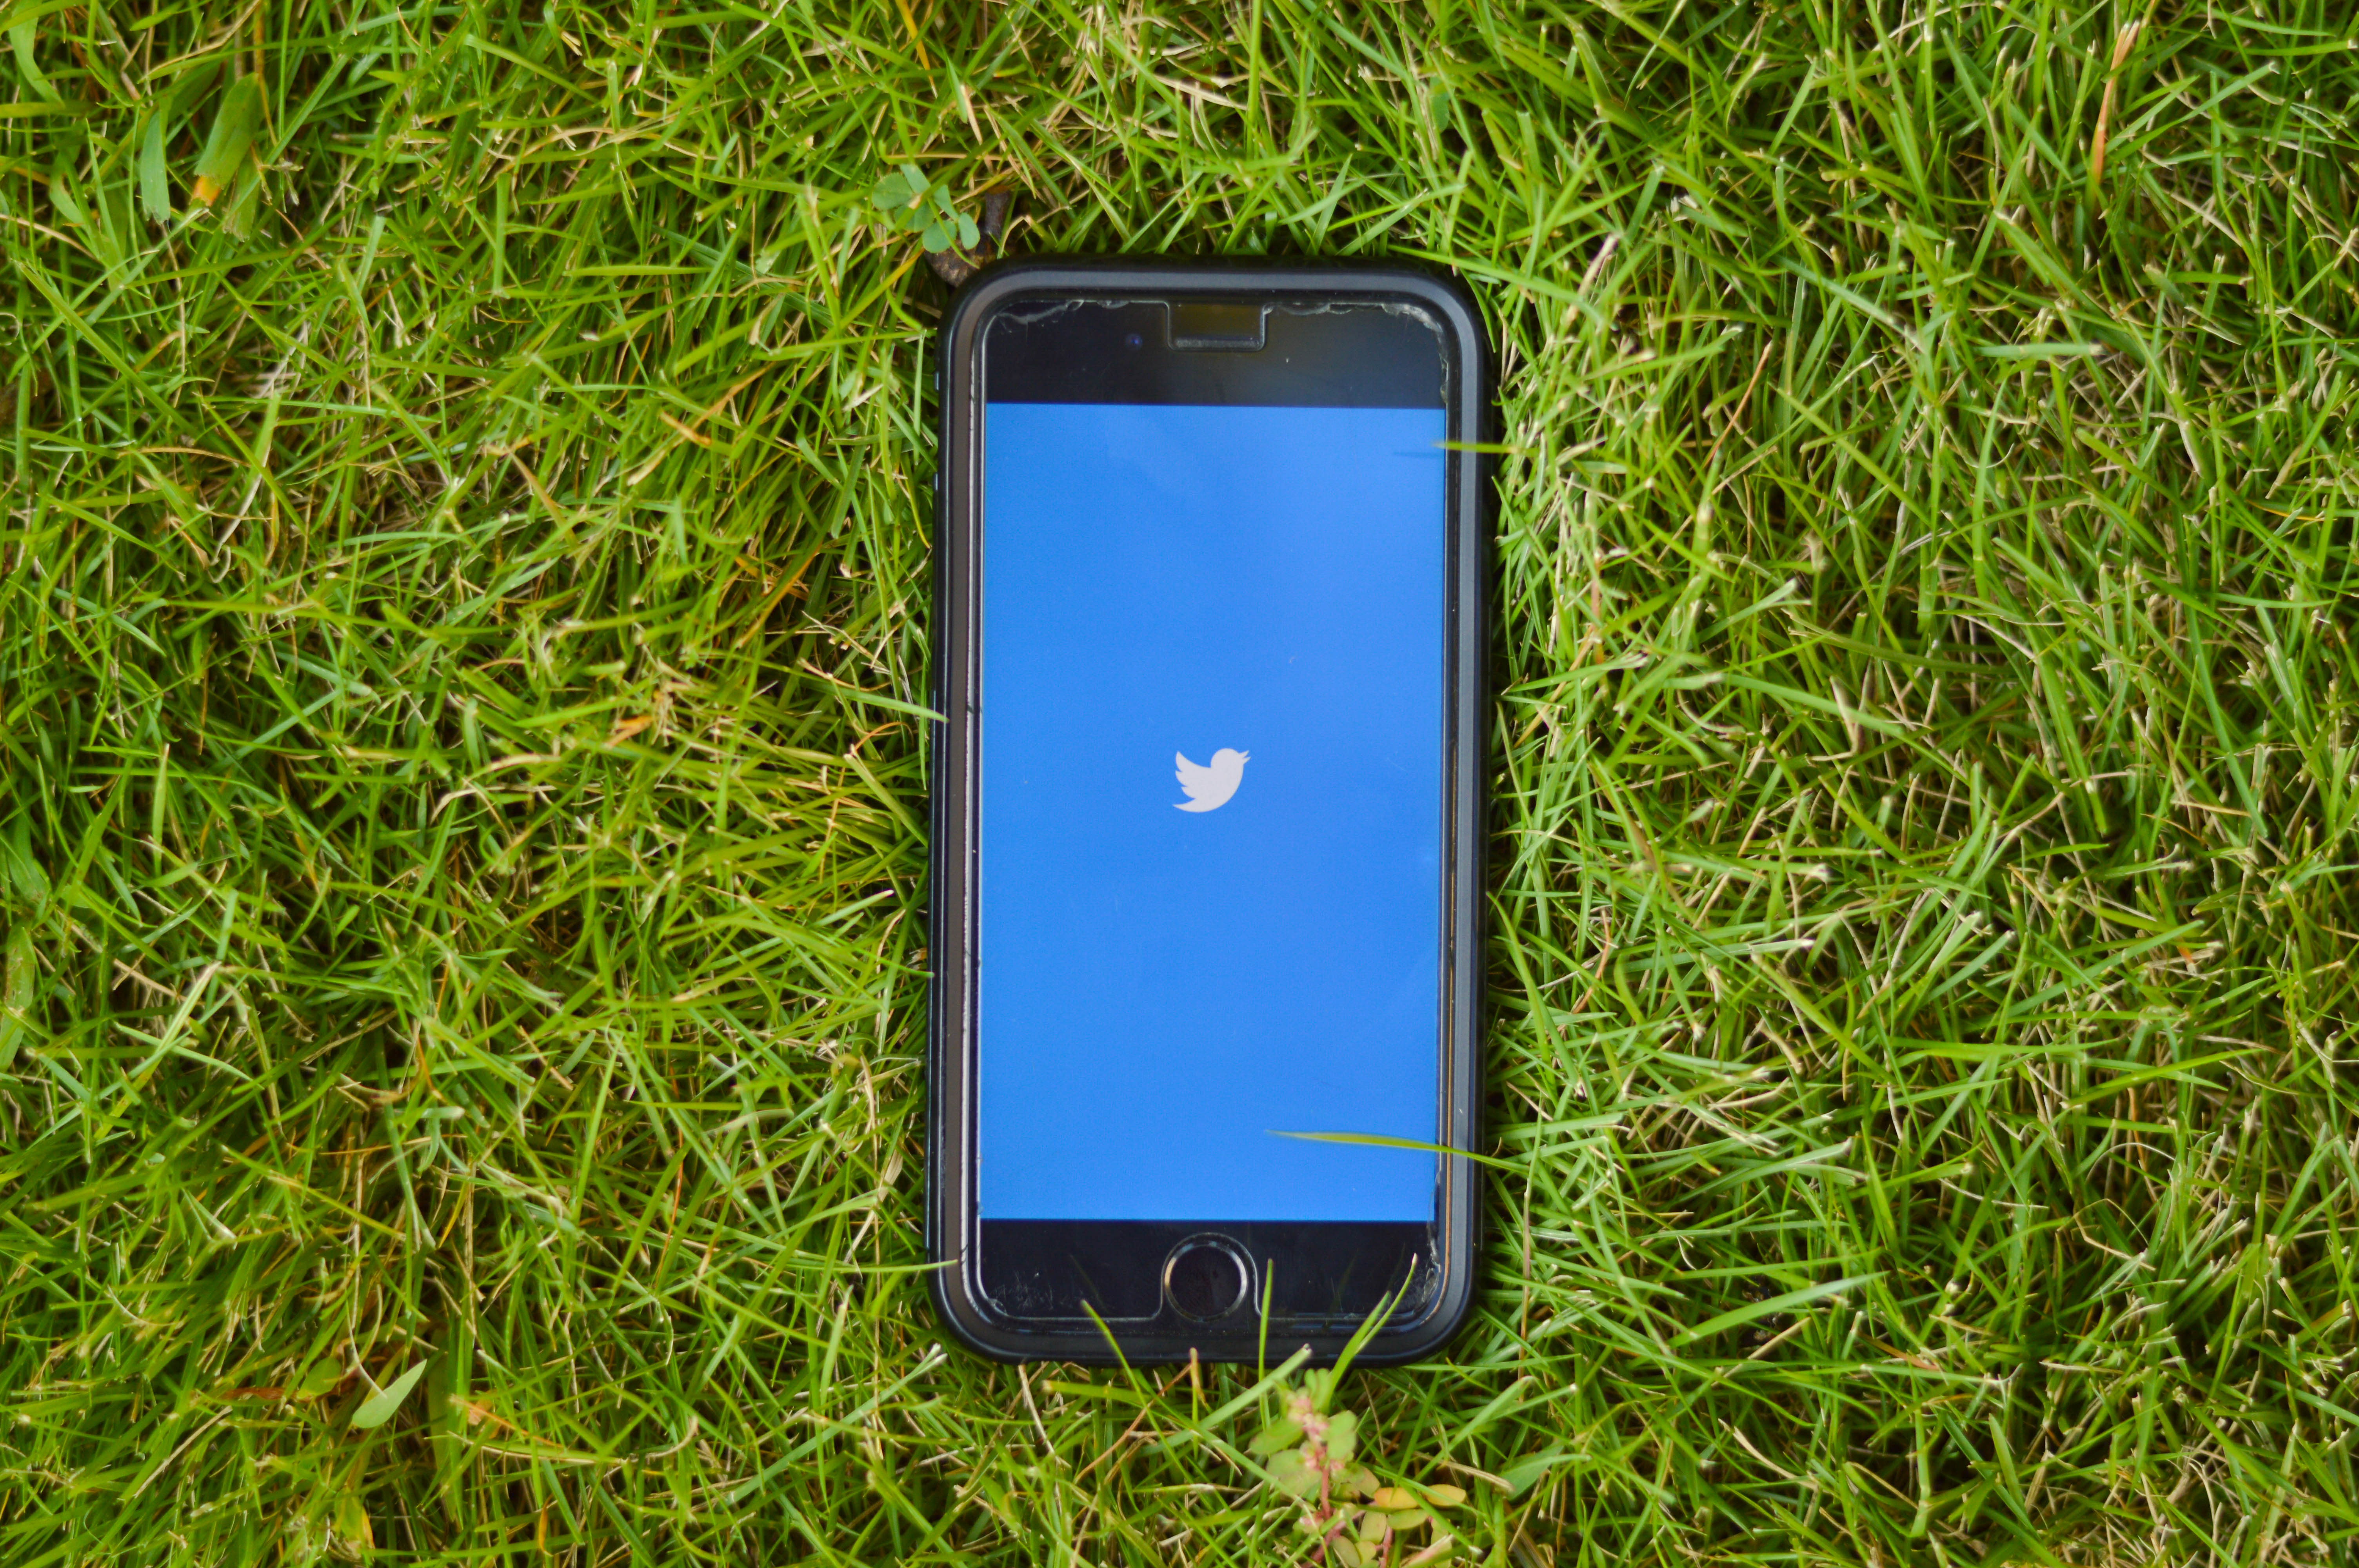 OPINION: Personalized Twitter algorithms create intellectual isolation